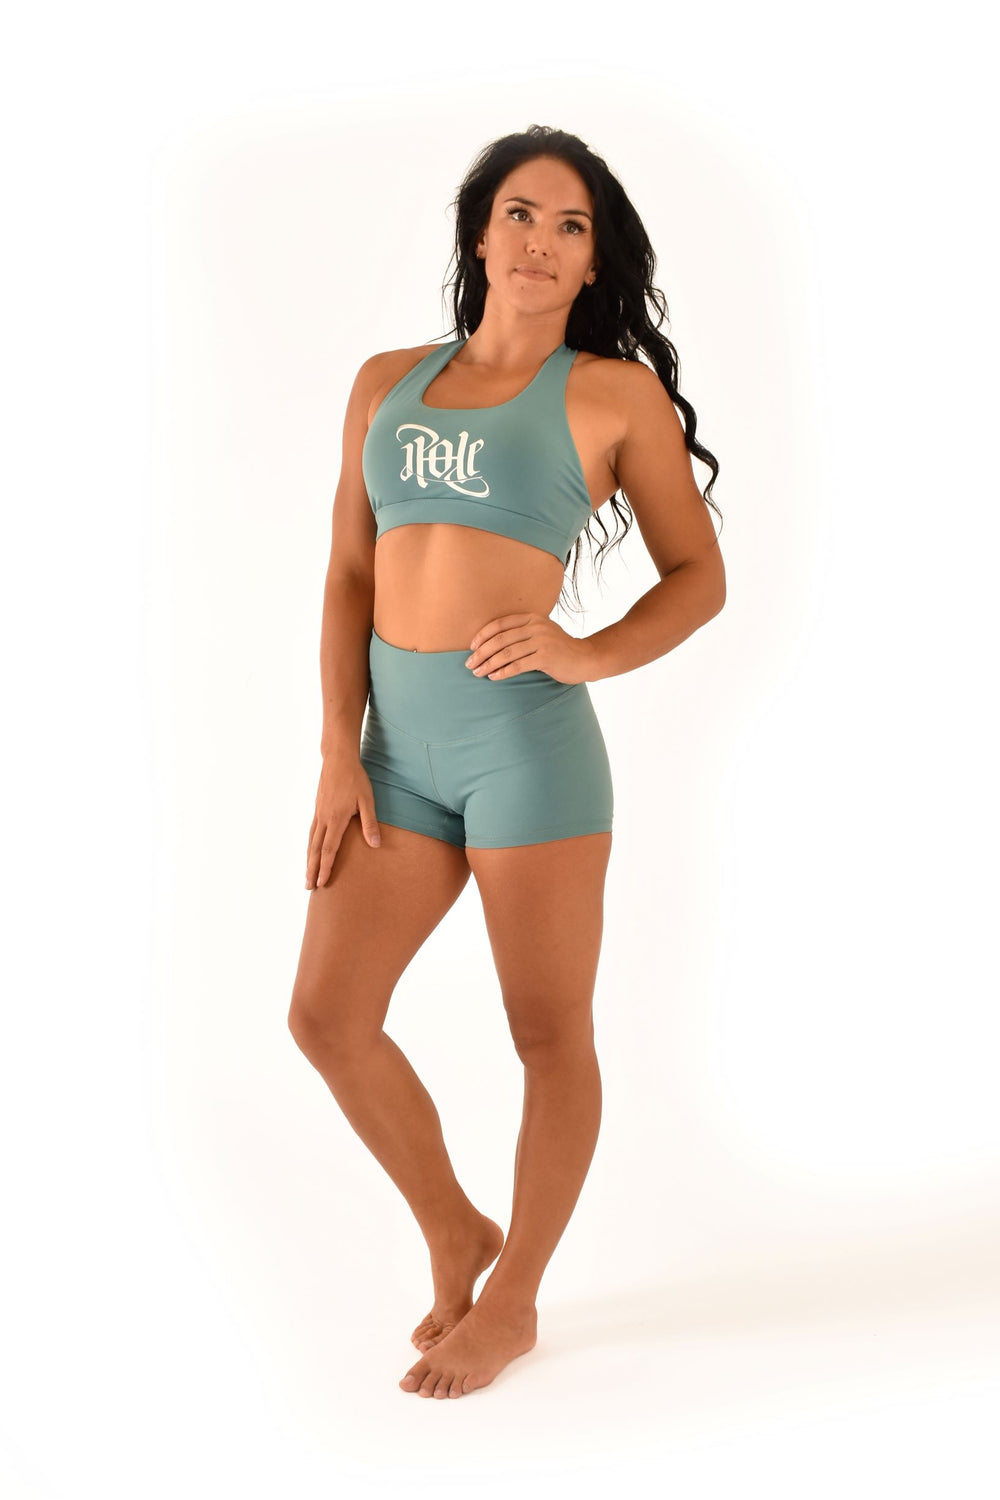 OFF THE POLE Signature Sports Bra - Teal *SIZE XL ONLY*